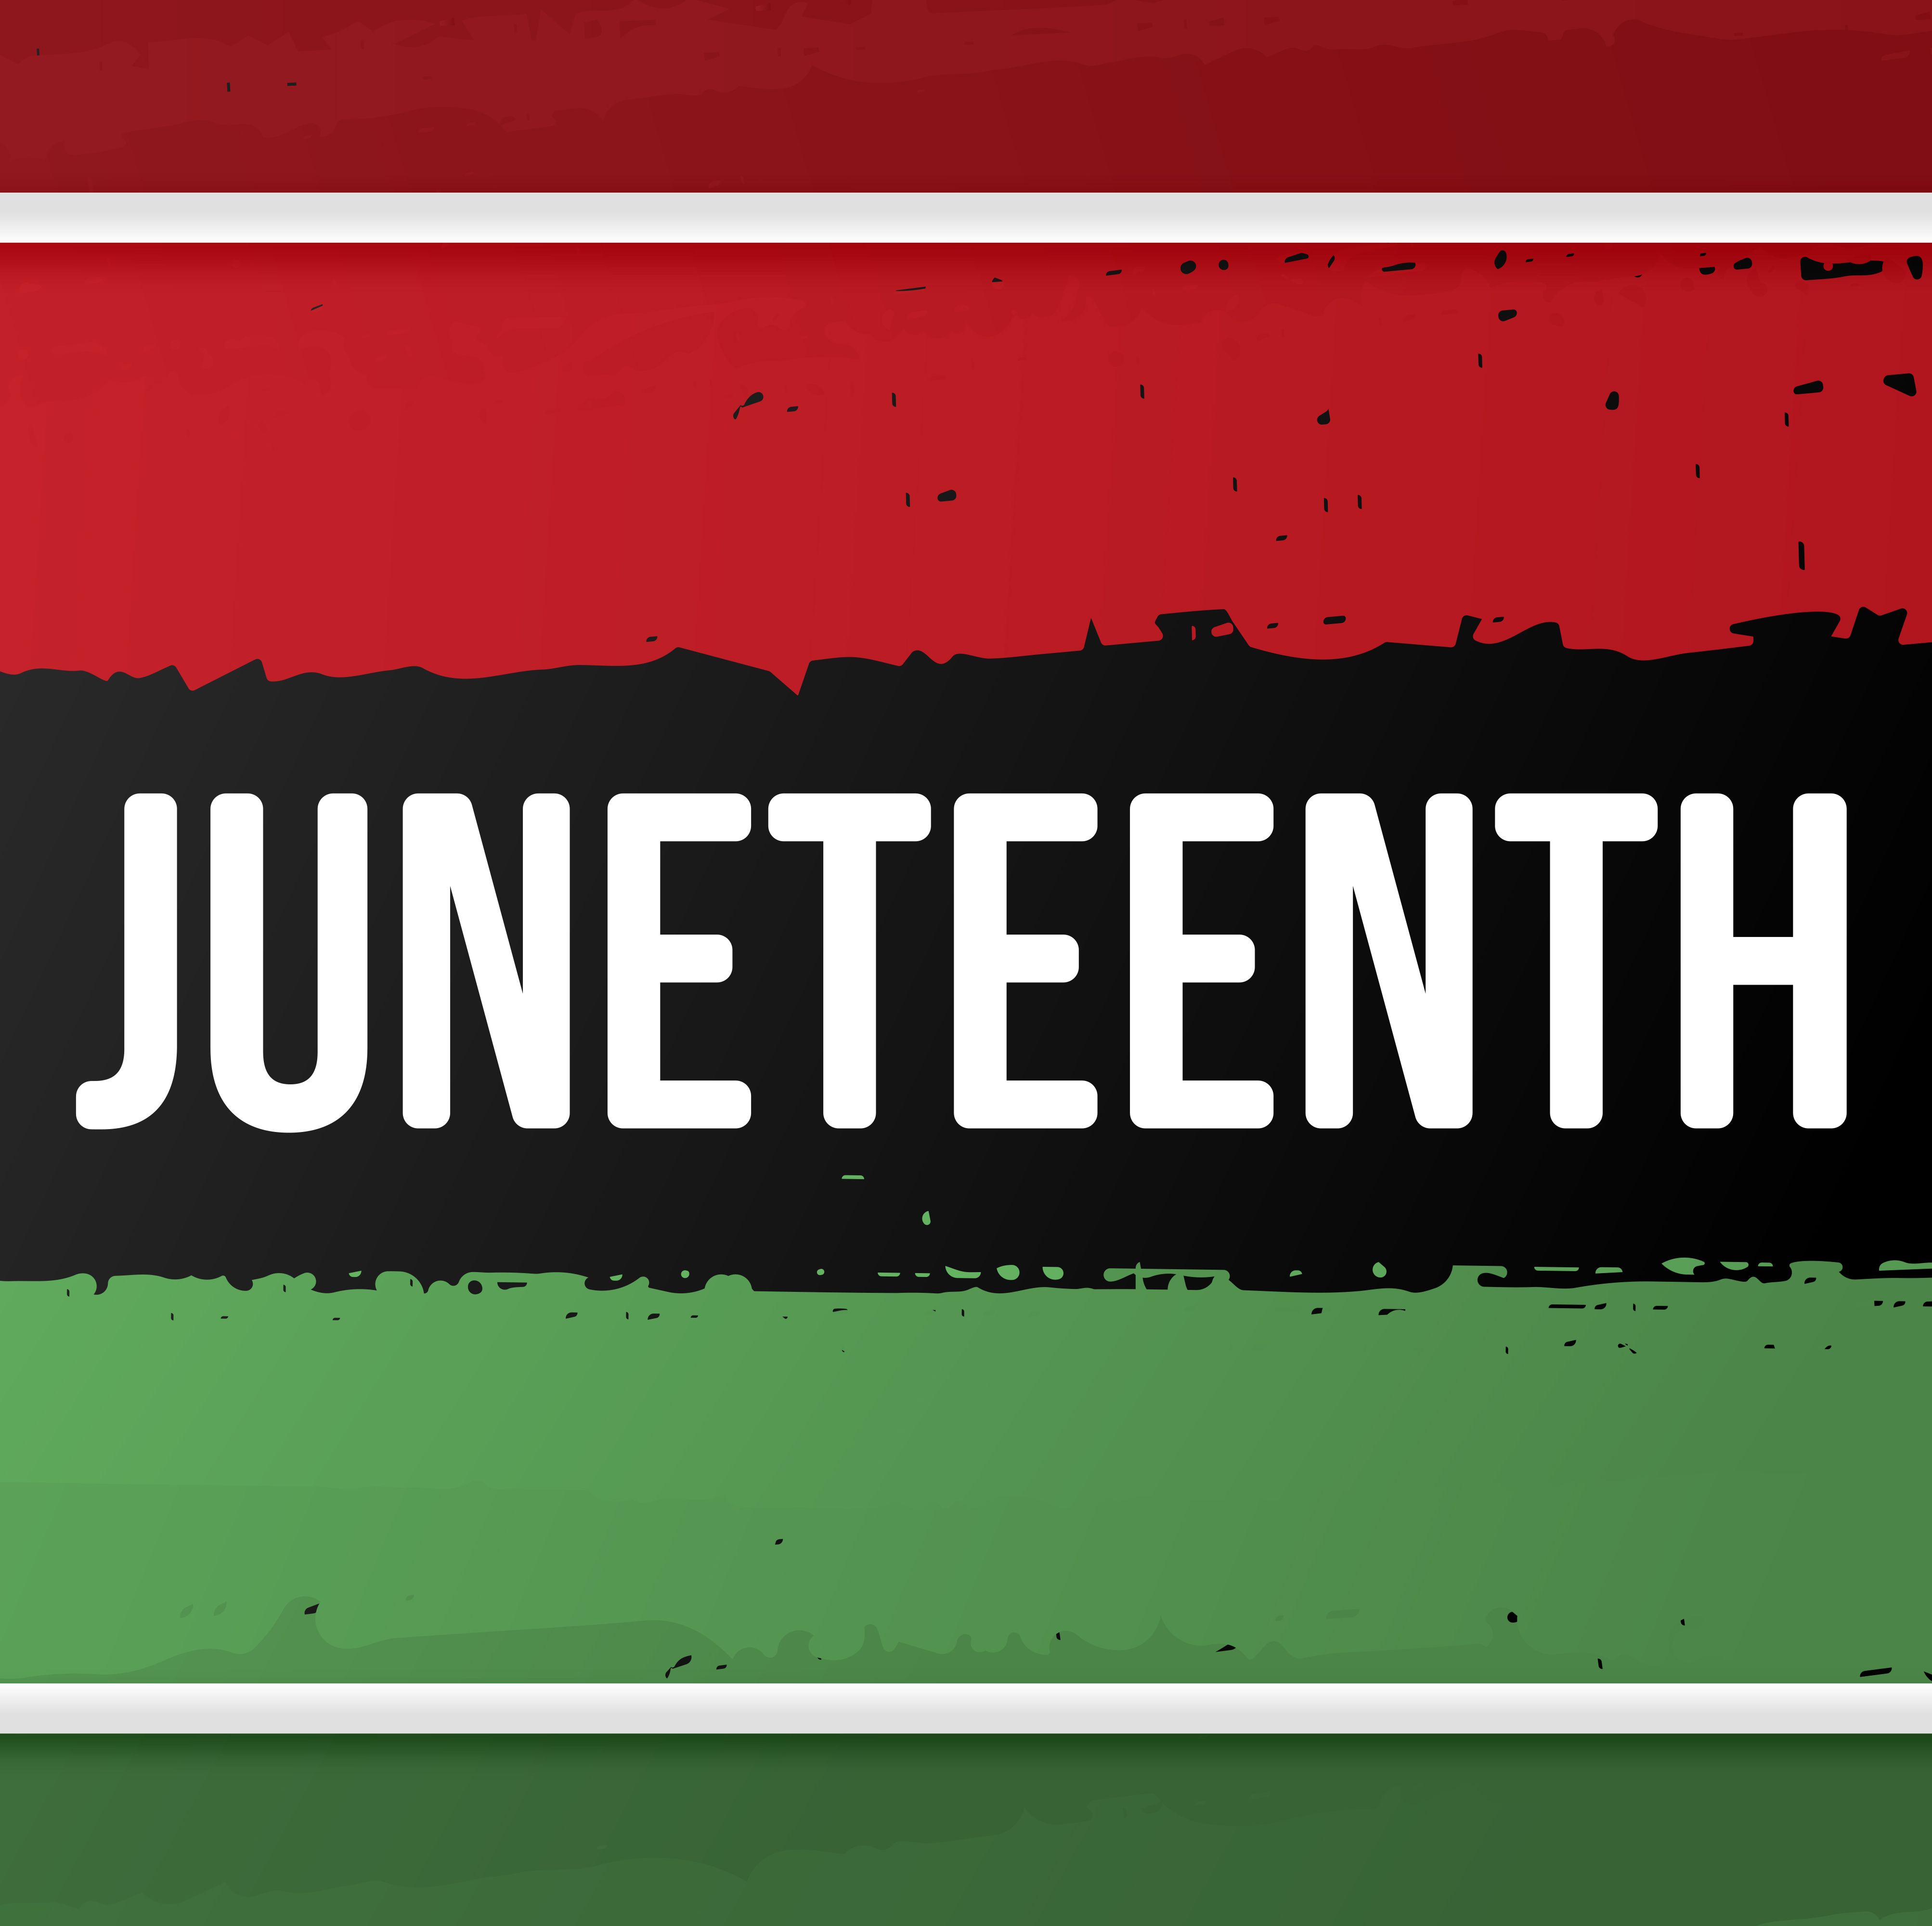 3 Traditional Juneteenth Prayers That Honor This Important Day